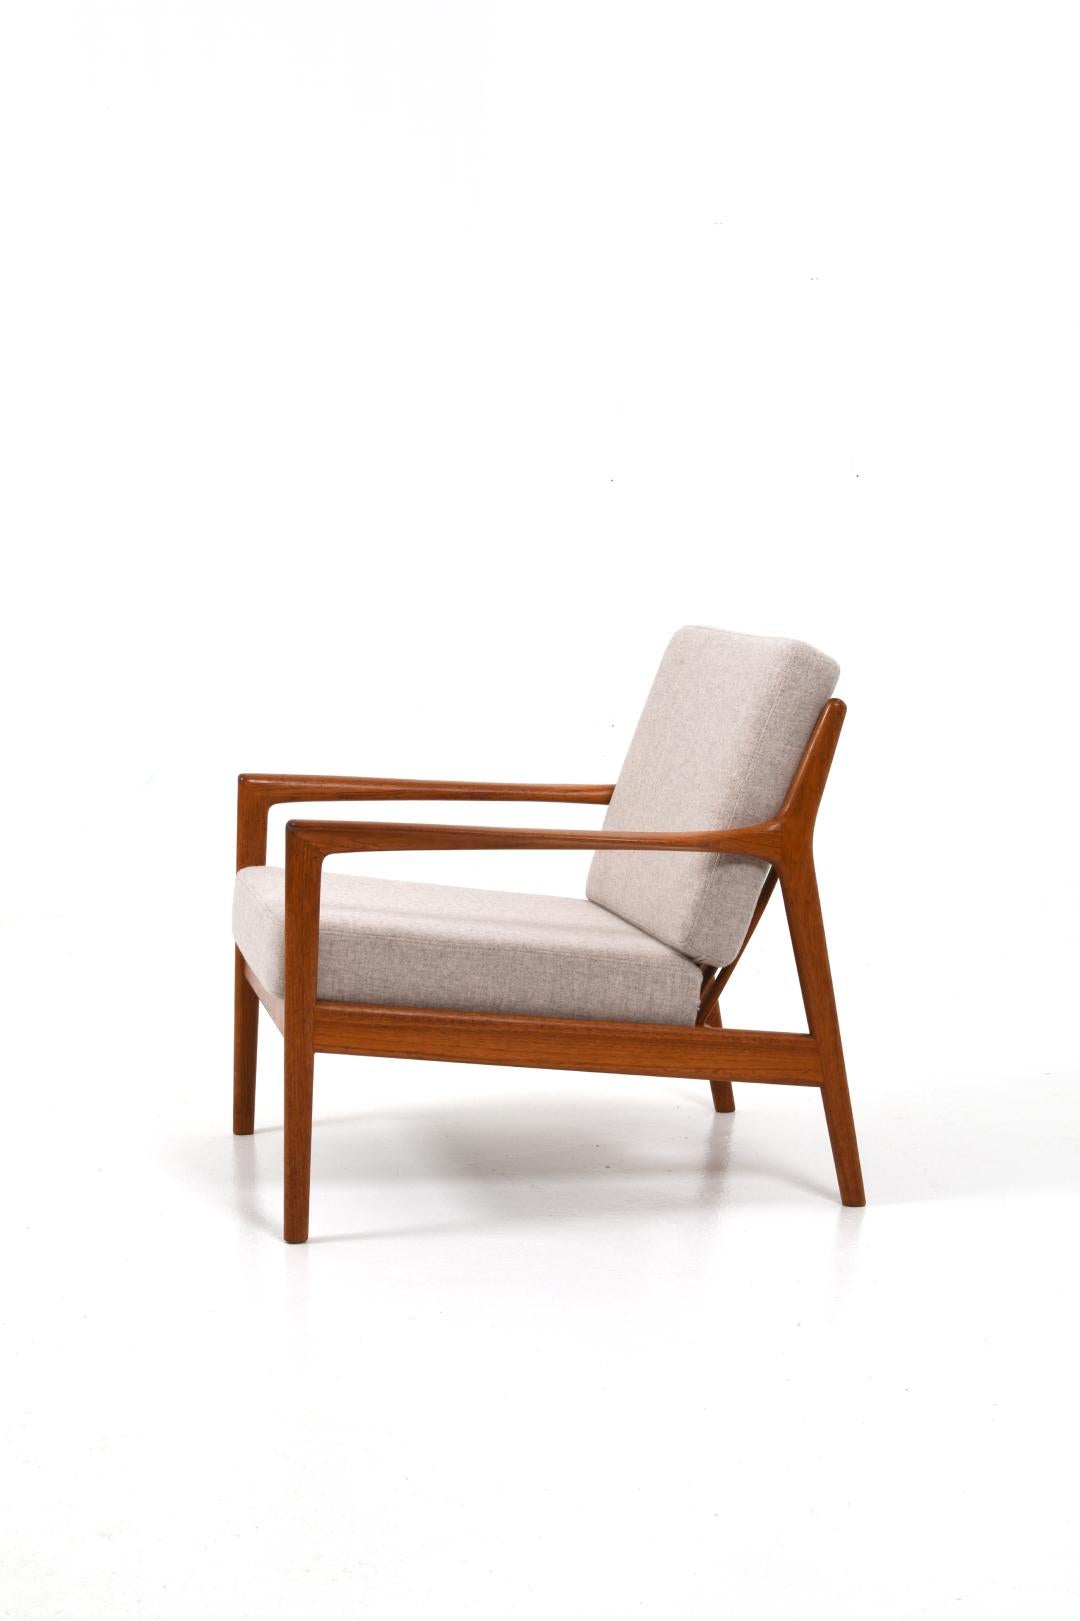 Teak Lounge Chairs USA 75 Folke Ohlsson by DUX In Good Condition For Sale In Göteborg, SE